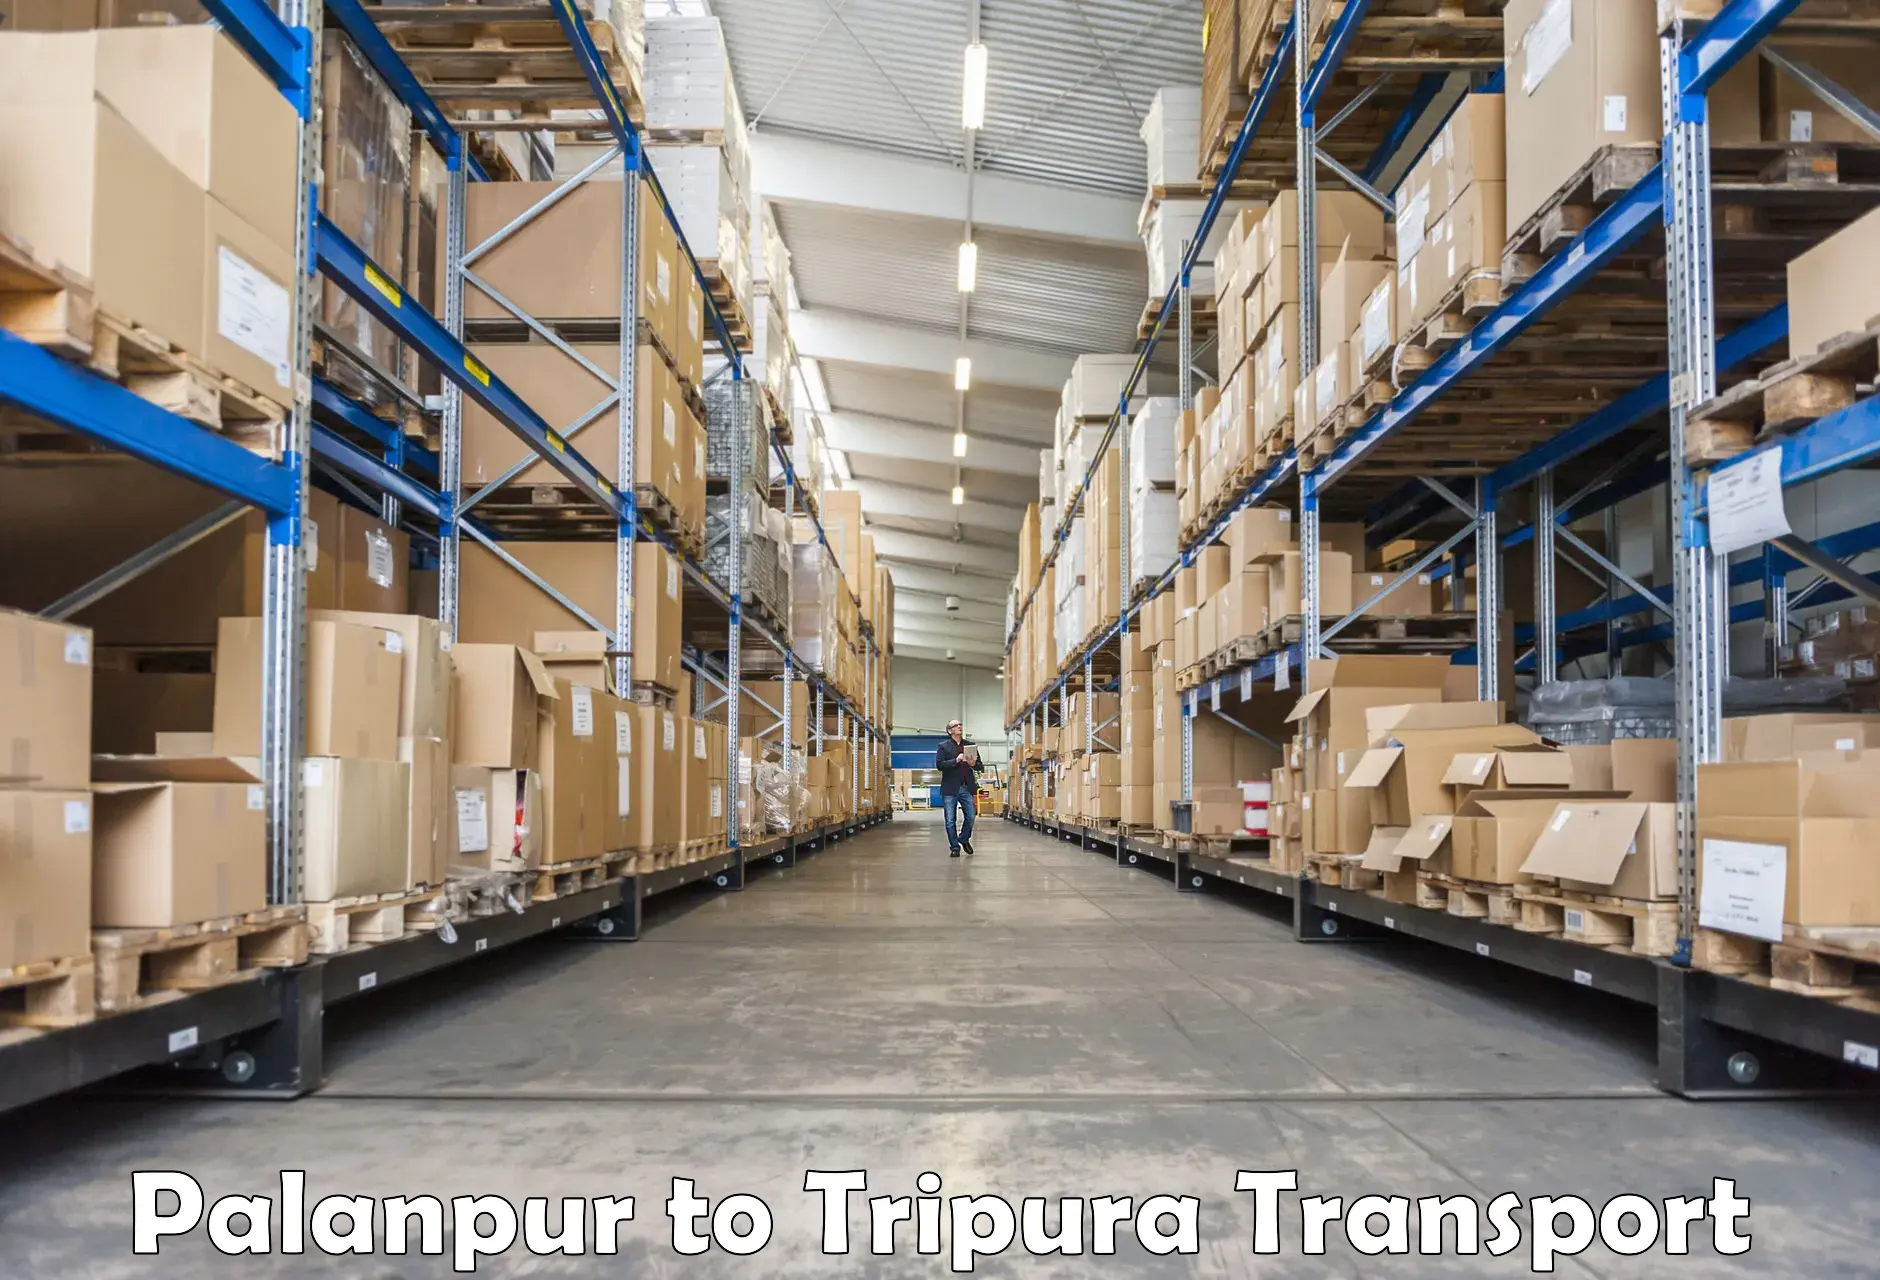 Delivery service Palanpur to North Tripura